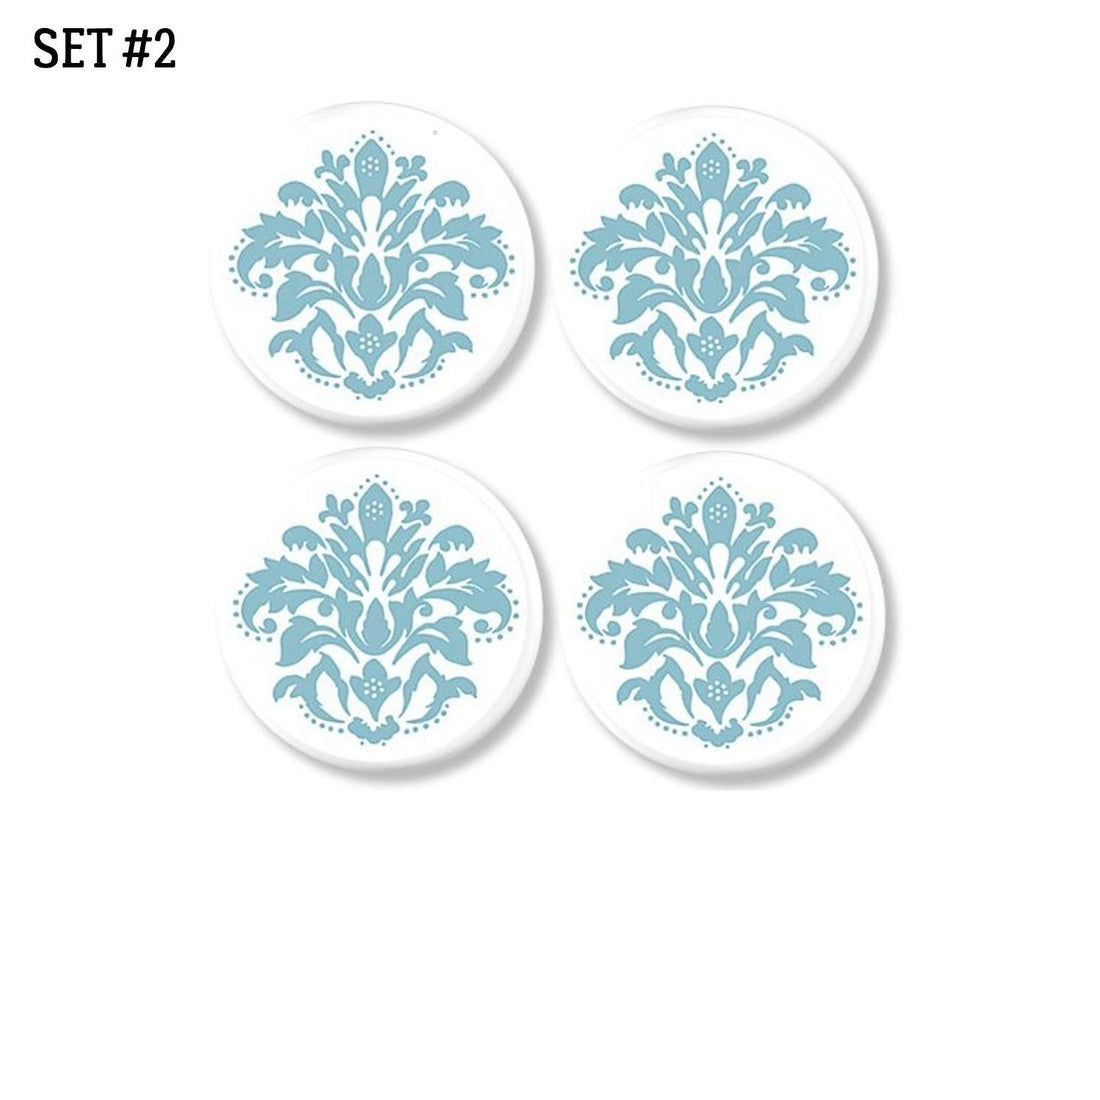 4 Bathroom cabinet door knobs decorated with turquoise blue and white lotus floral damask print.